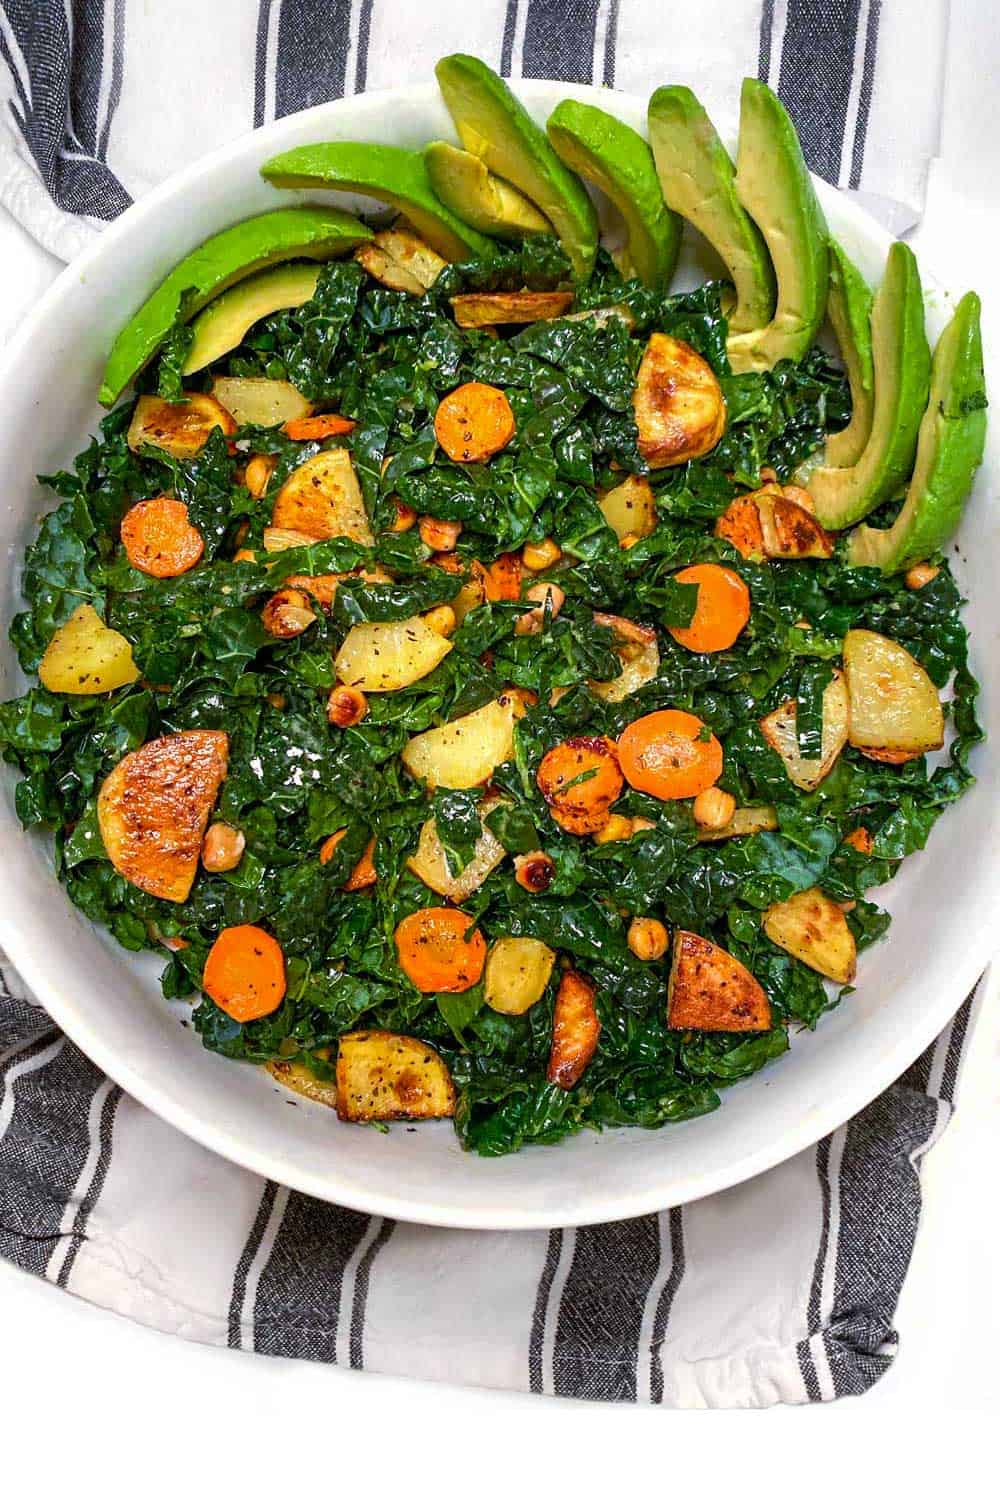 white serving bowl on black and white striped dish towel, filled with shredded kale and roasted carrots, potatoes, chickpeas and sliced avocado